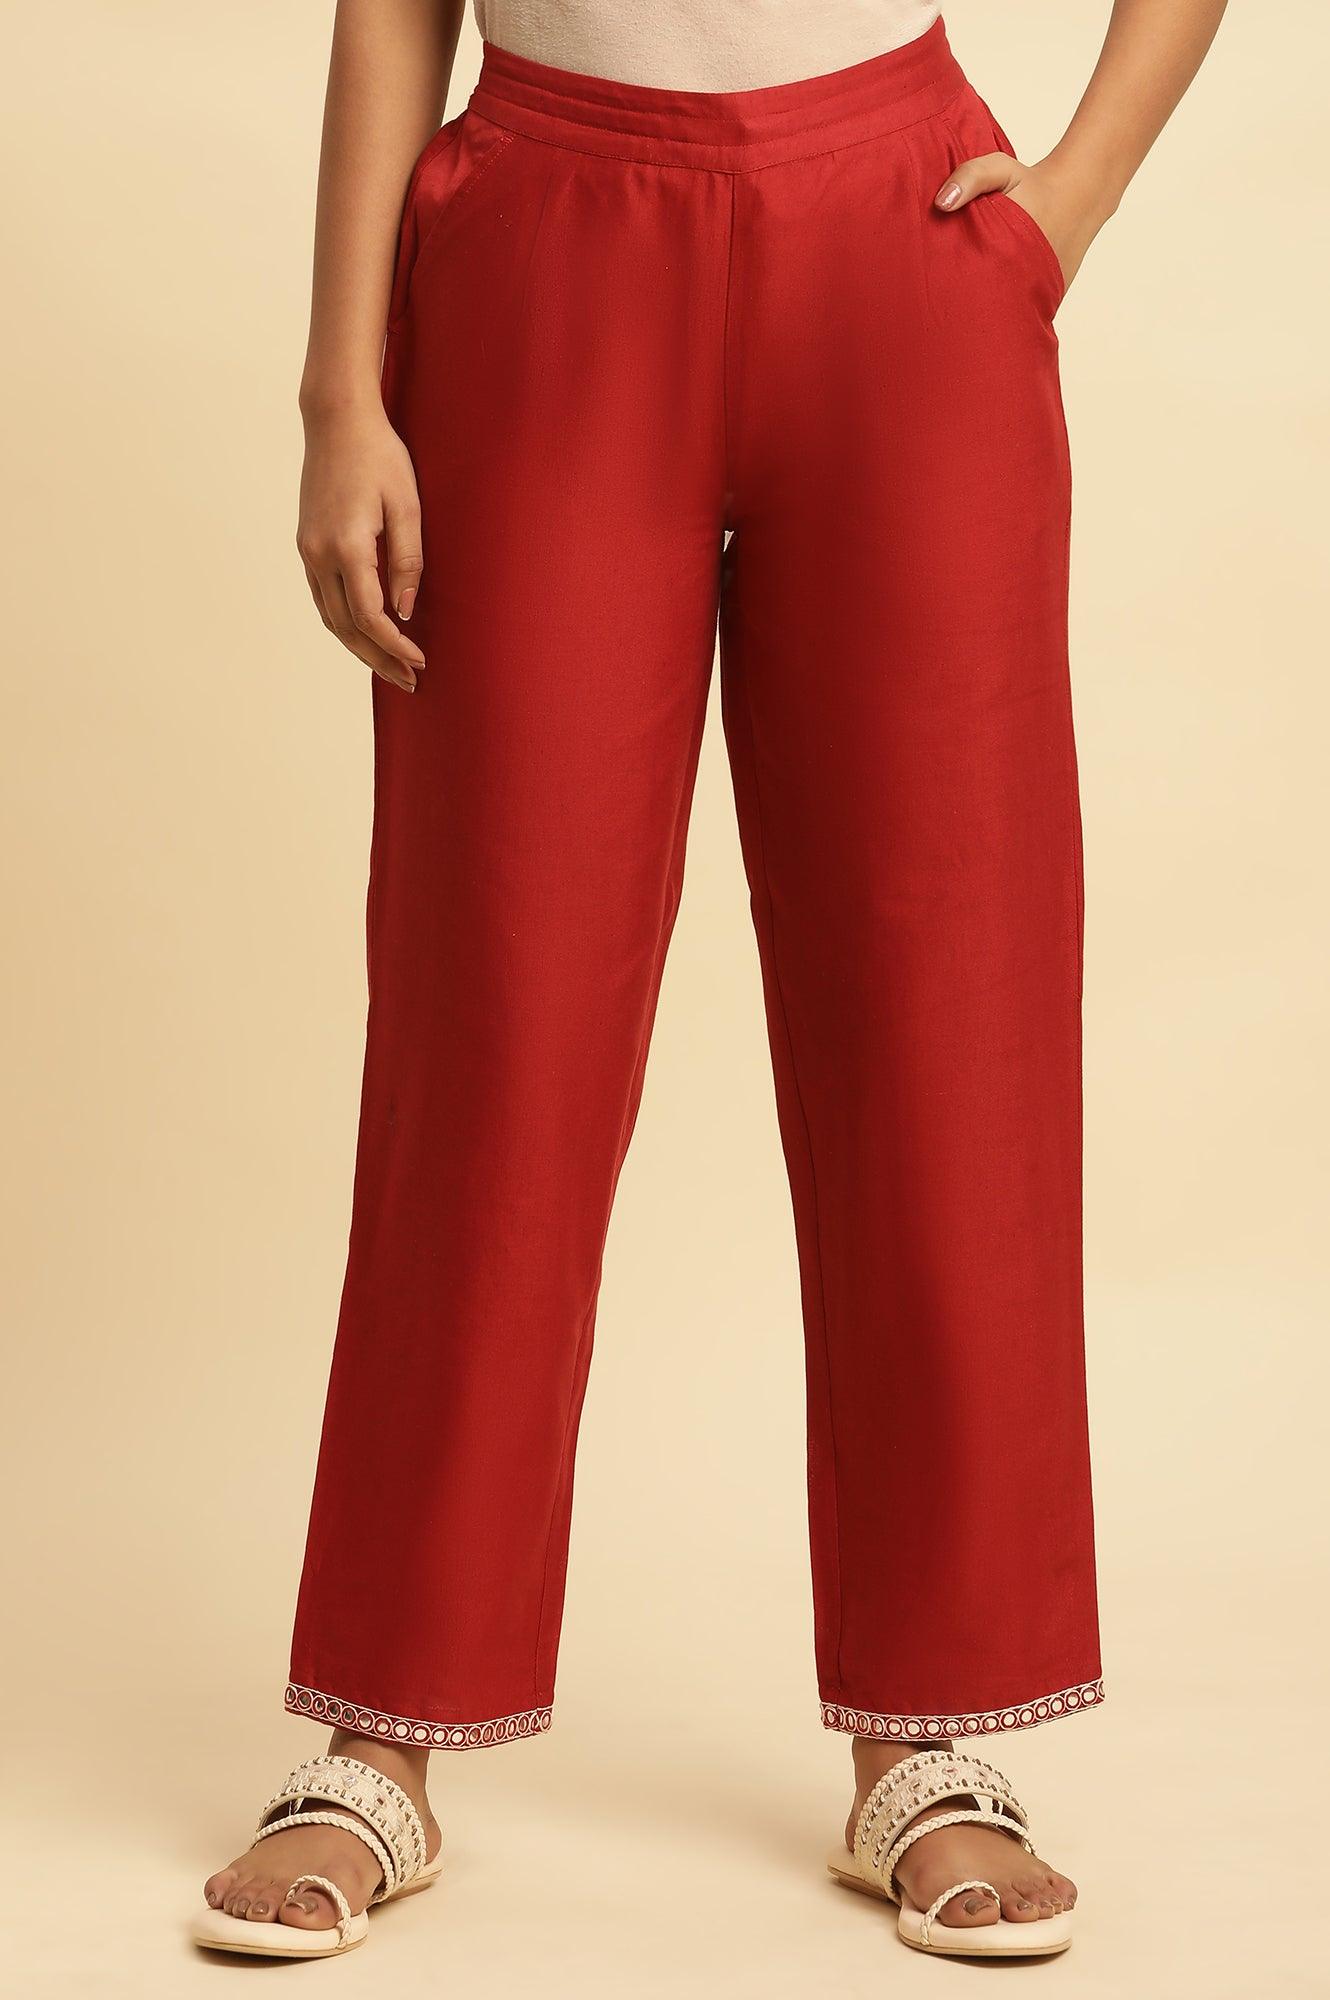 Red Cotton Flax Straight Pants With Embroidery - wforwoman